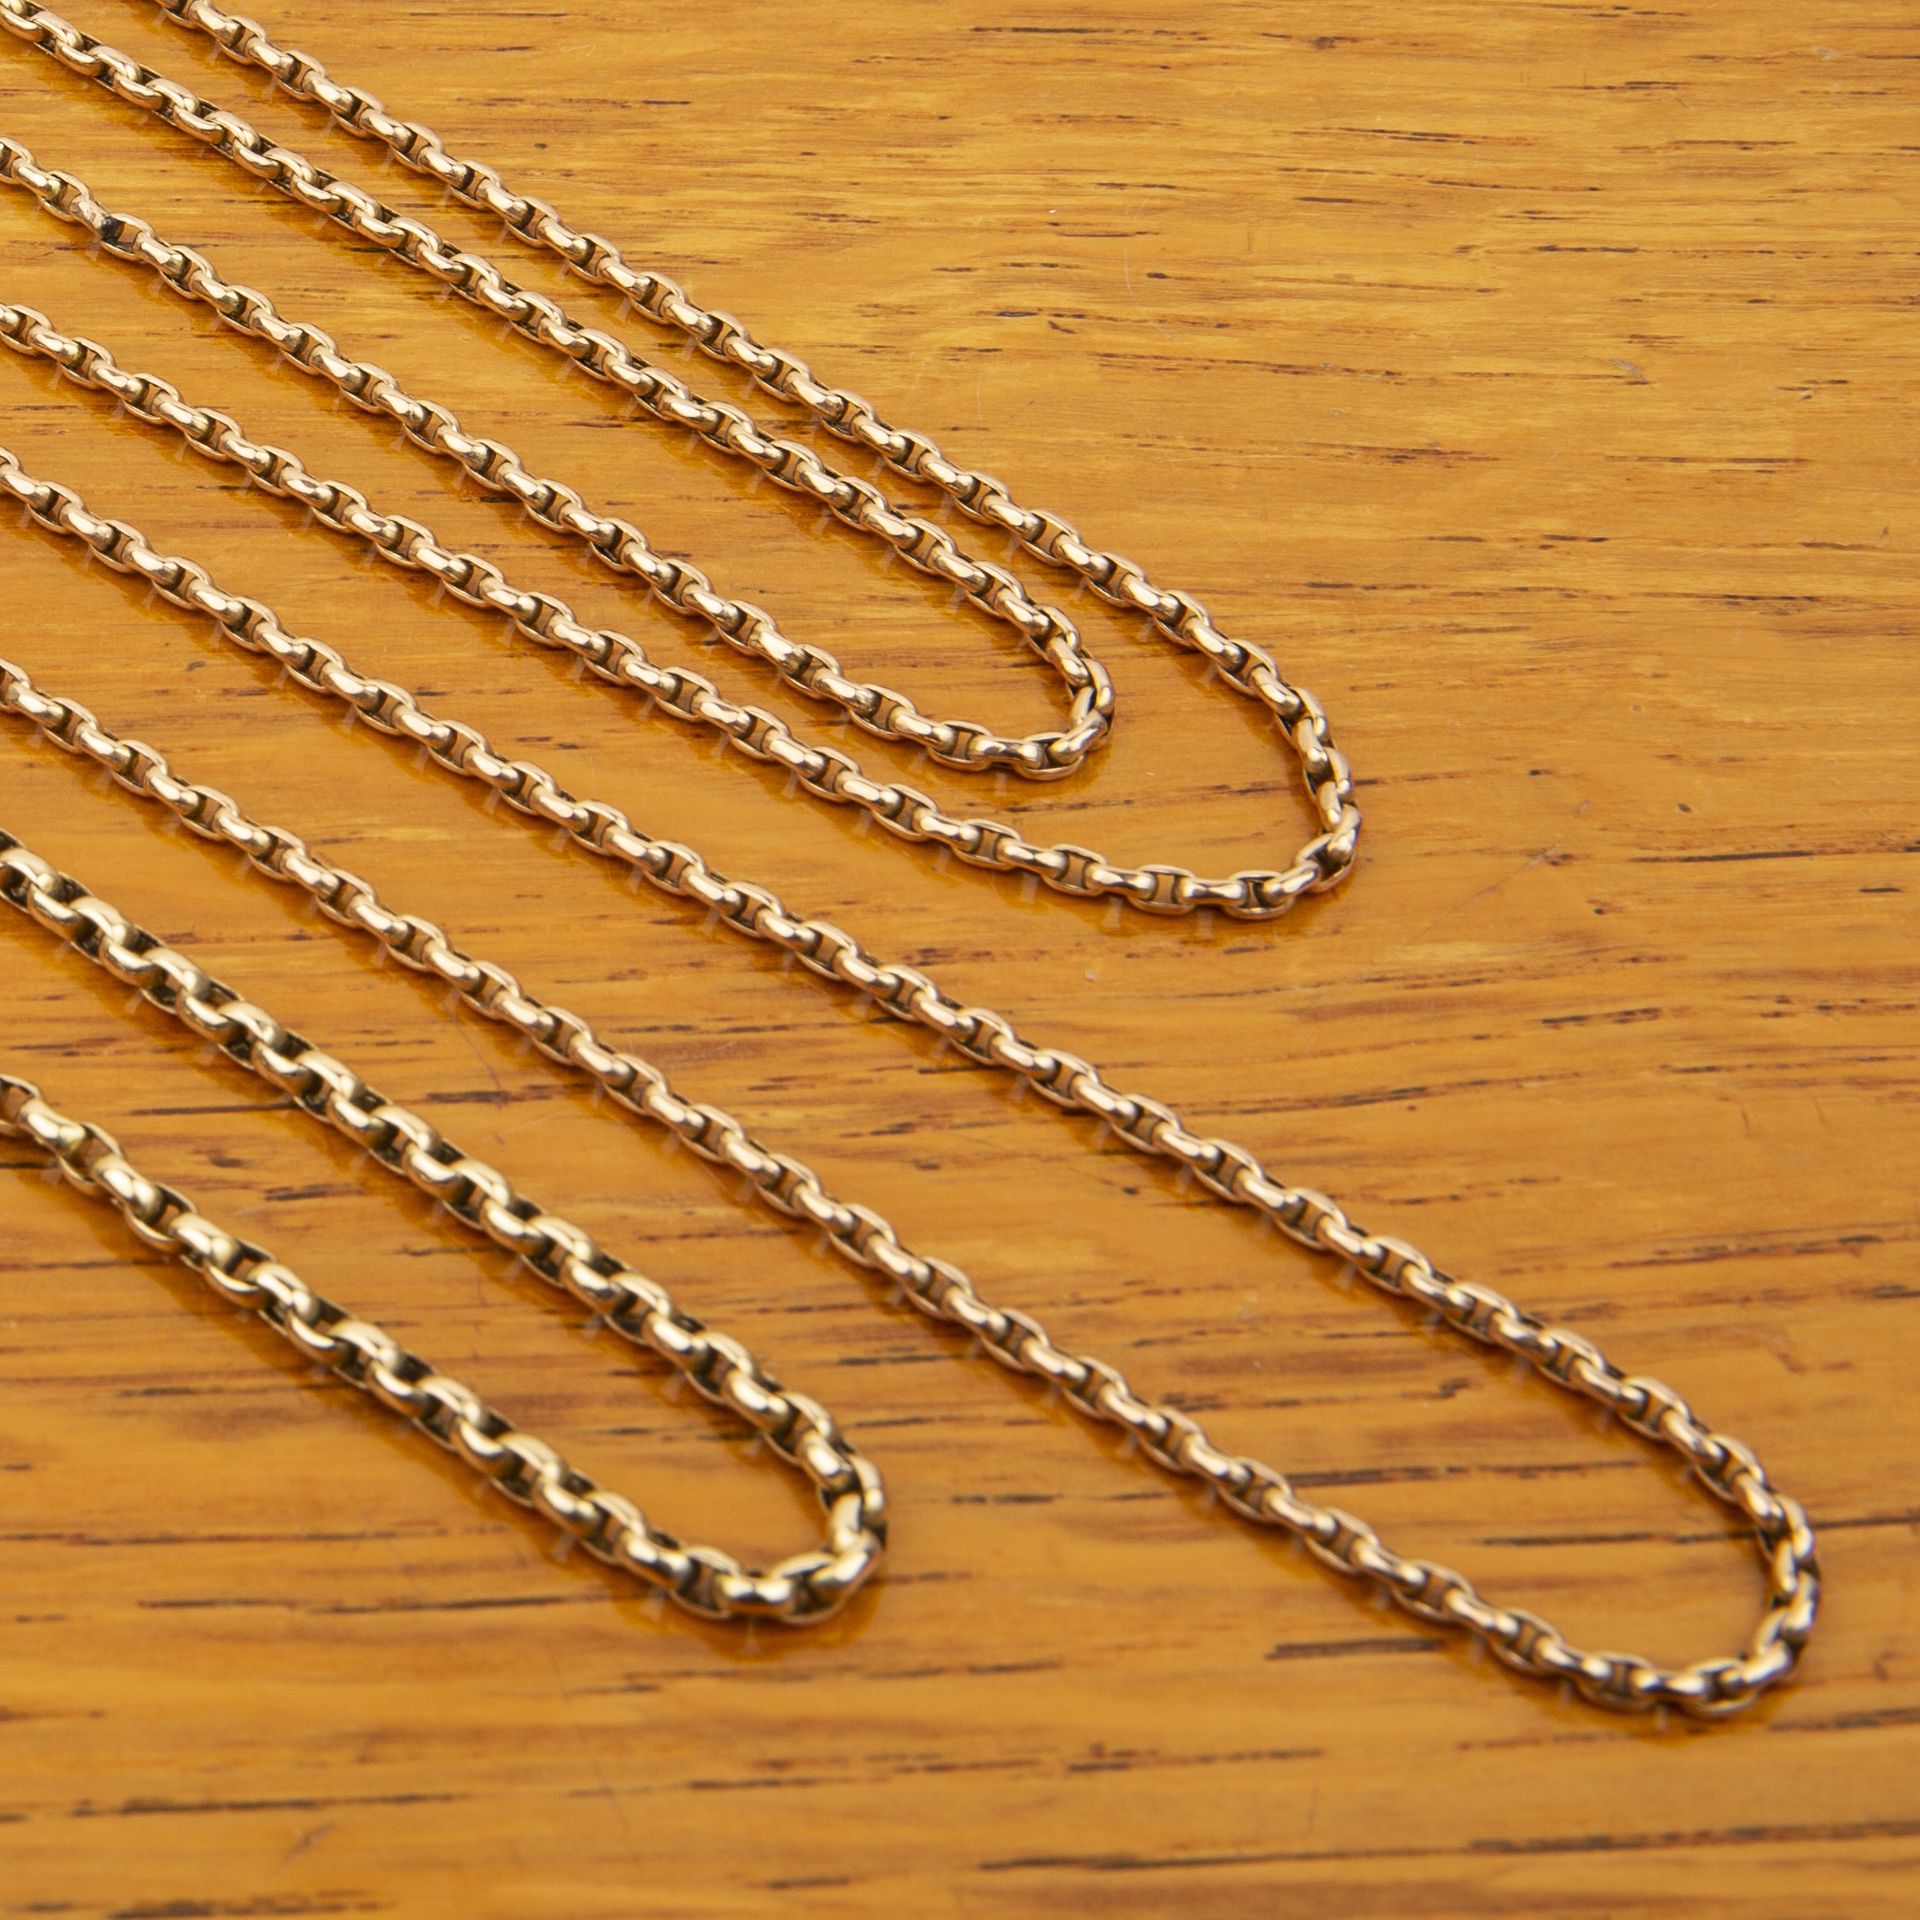 9ct yellow gold guard chain marked '9C' near the o ring, 150cm approx overall, 26g approx overall - Image 2 of 2